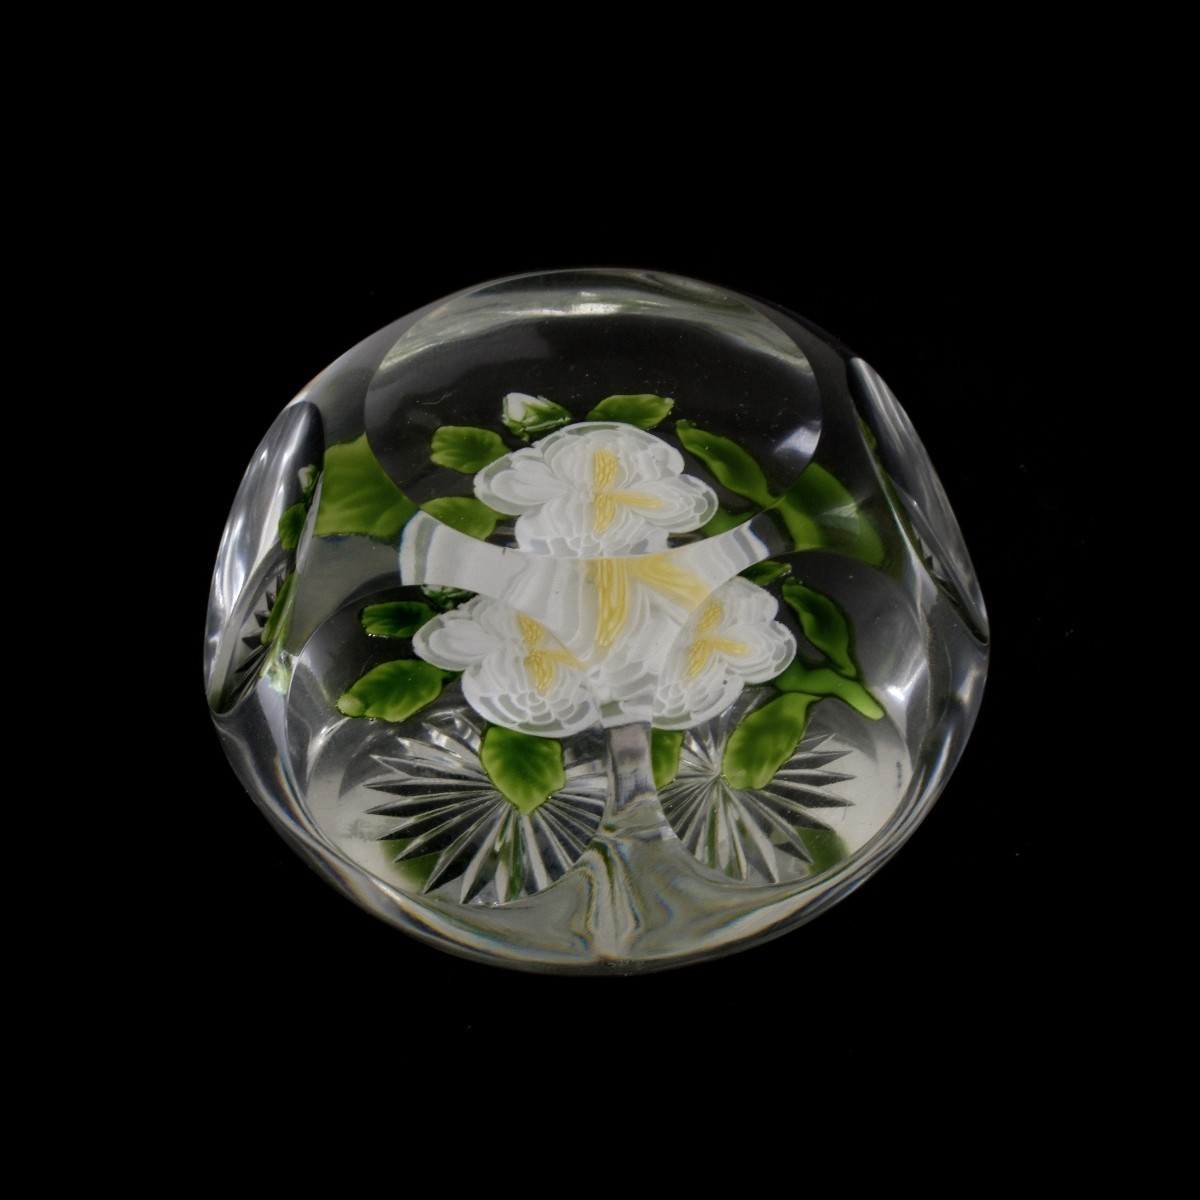 Antique Baccarat White Peony Paperweight